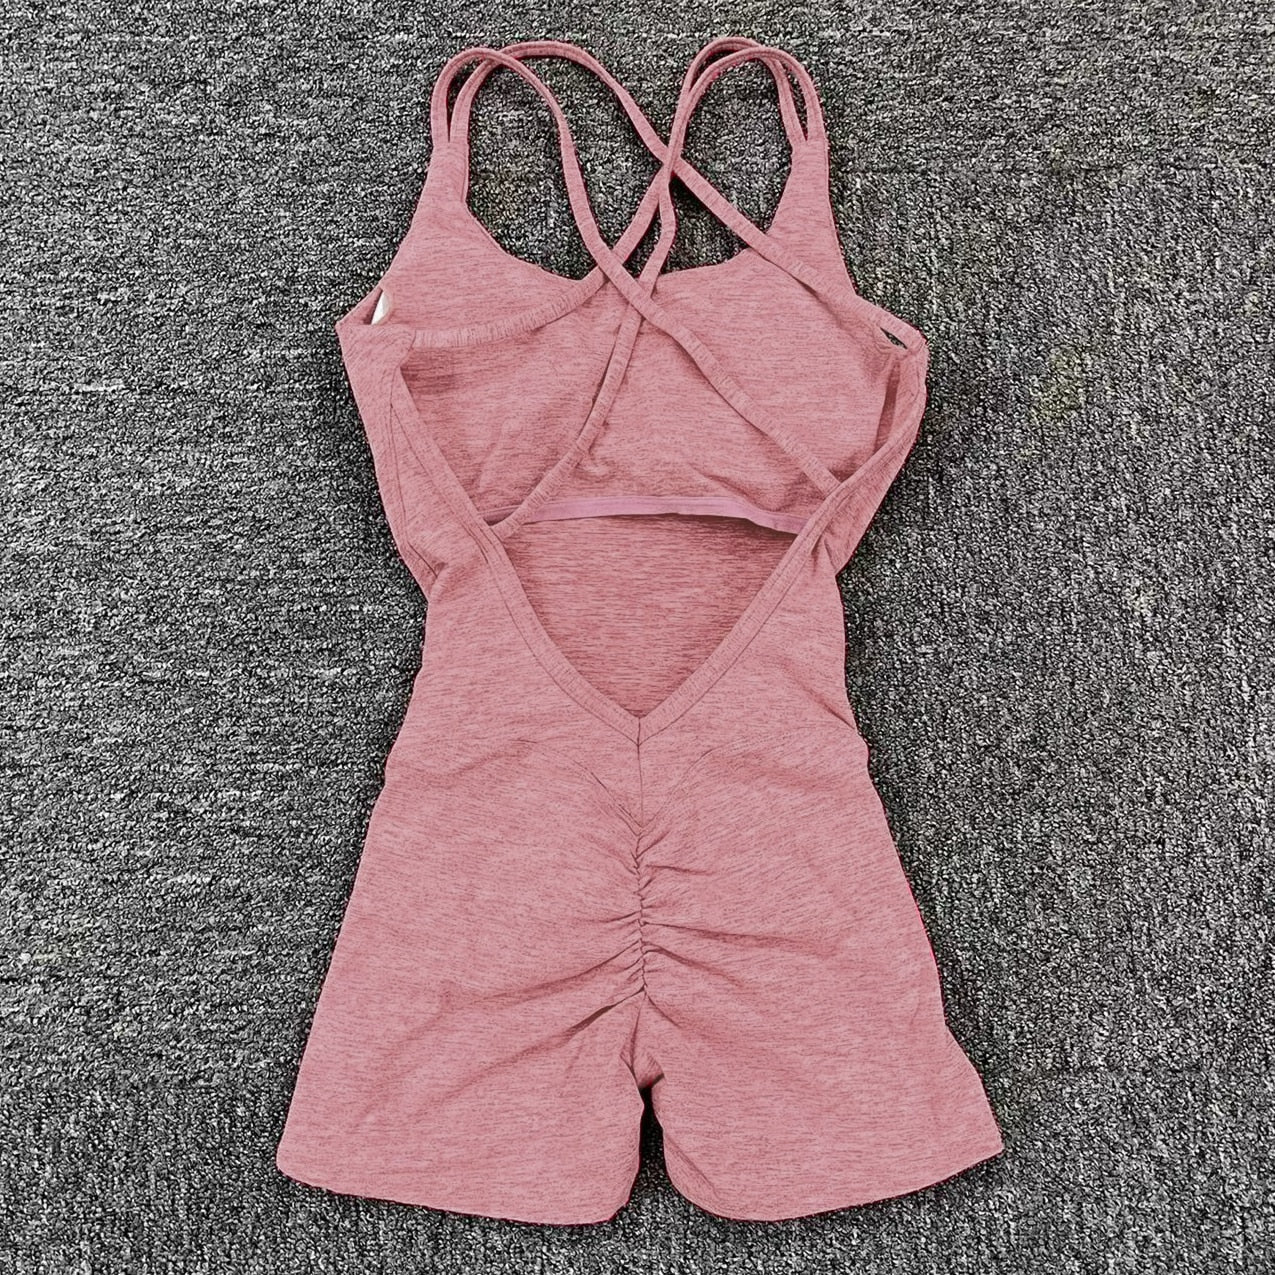 2023 Pad Lycra Active Wear Gym Yoga Sets Women Fitness Clothing Women Workout Female Sports Outfit Suits Exercise Jumpsuit